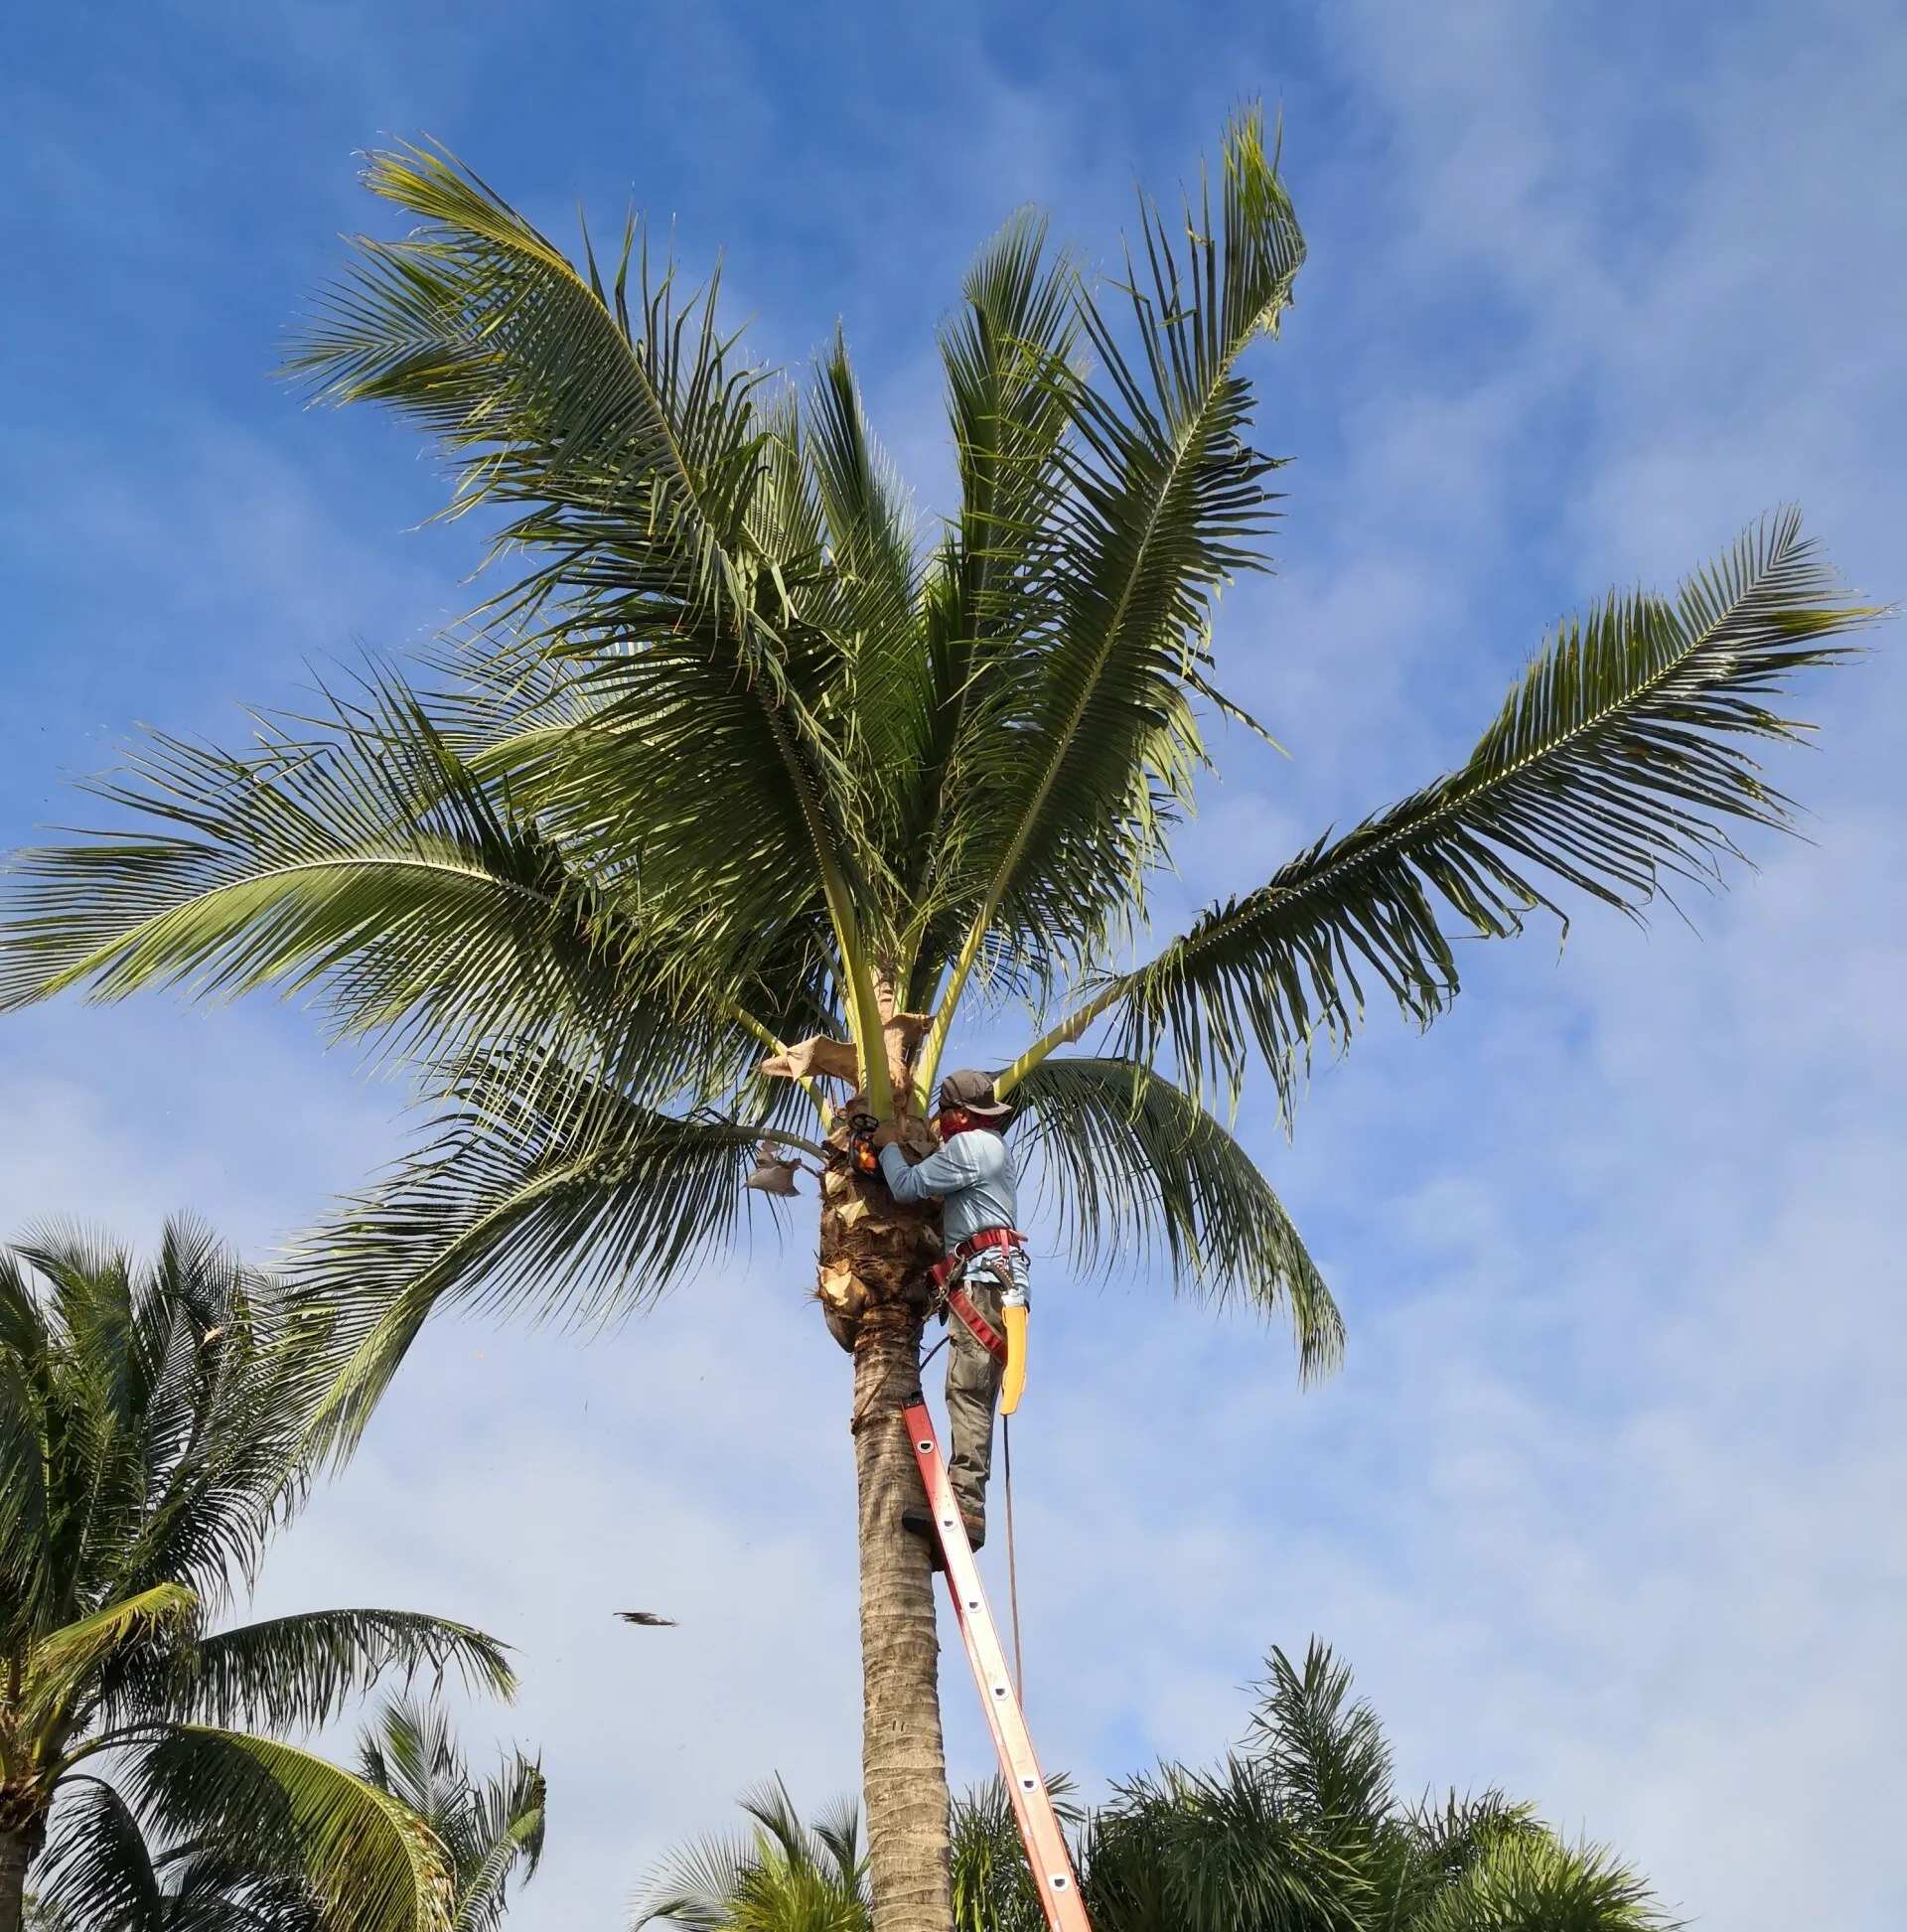 A licensed and insured arborist in protective gear is climbing a ladder leaned against a tall palm tree, meticulously trimming the branches. The sky is partly cloudy, with other palm trees visible in the background.